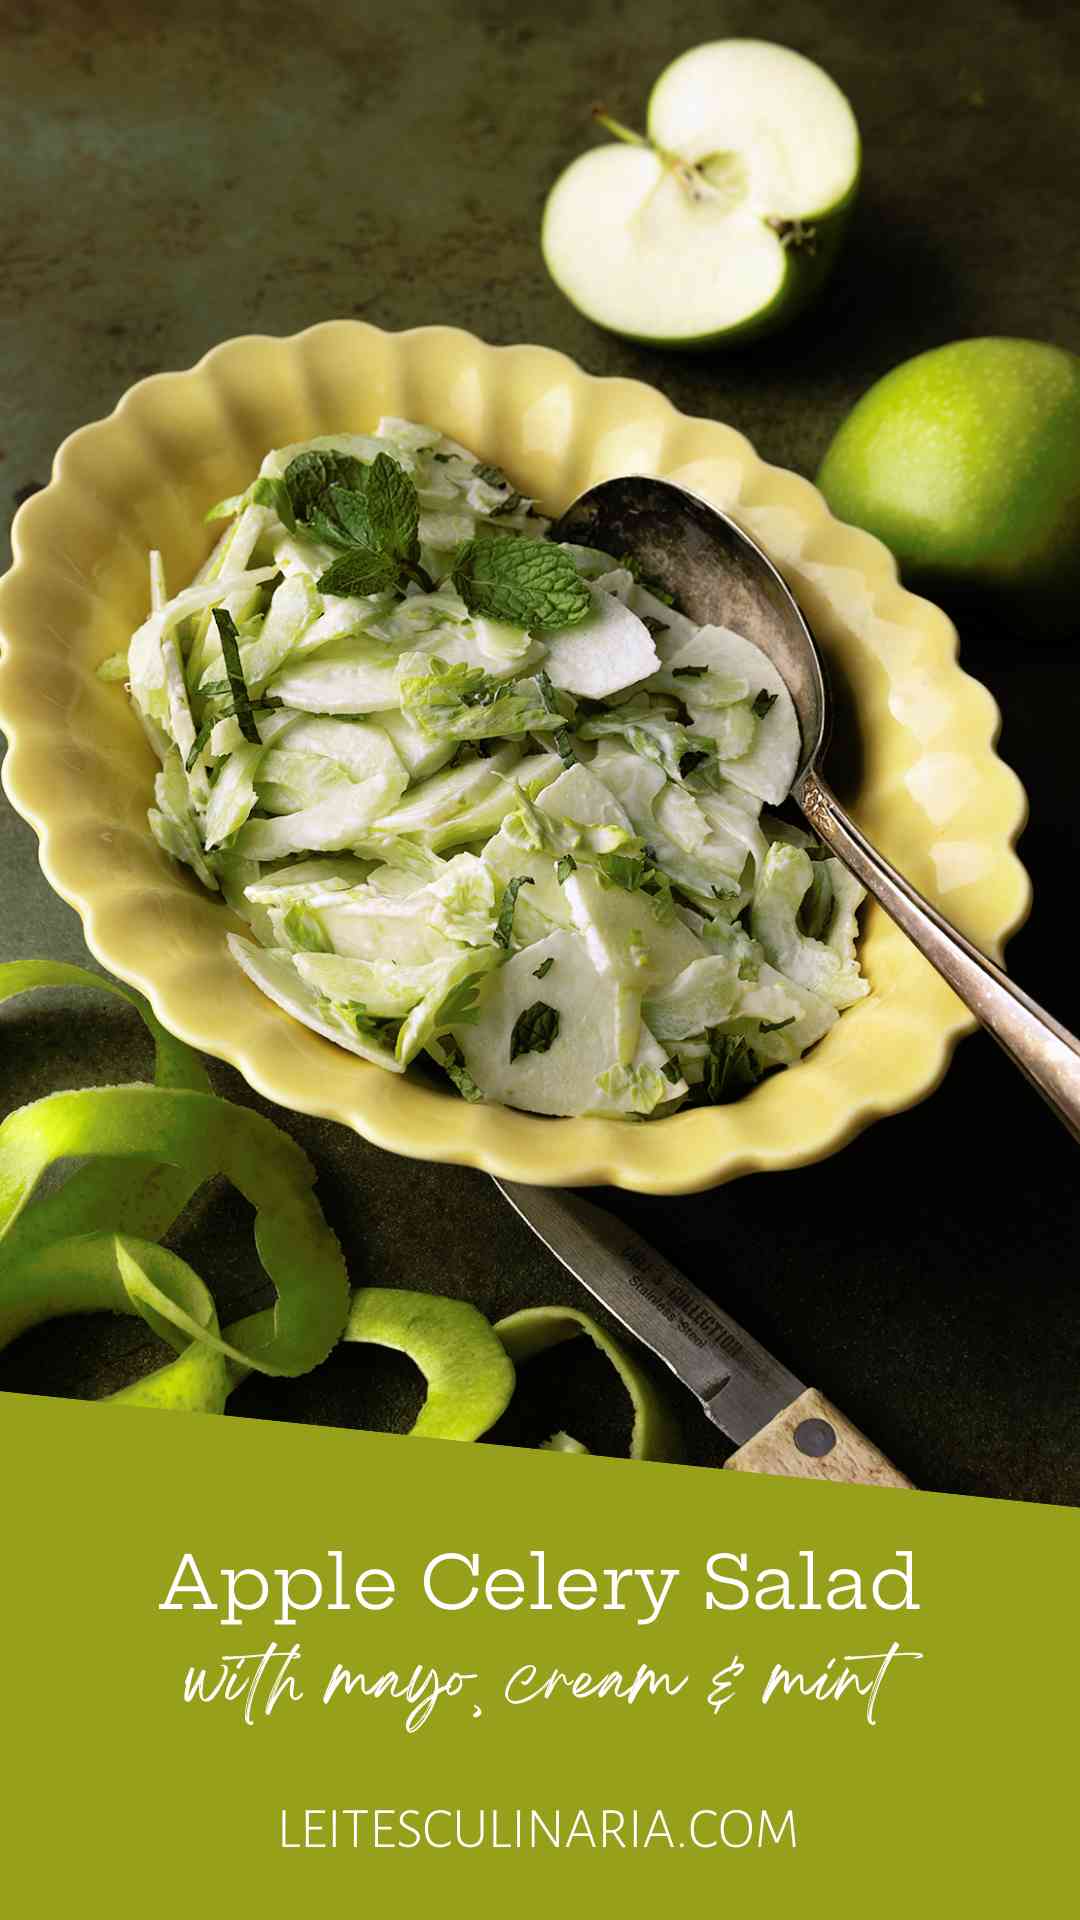 An apple and celery salad in a creamy dressing, garnished with mint leaves in a yellow scalloped bowl.